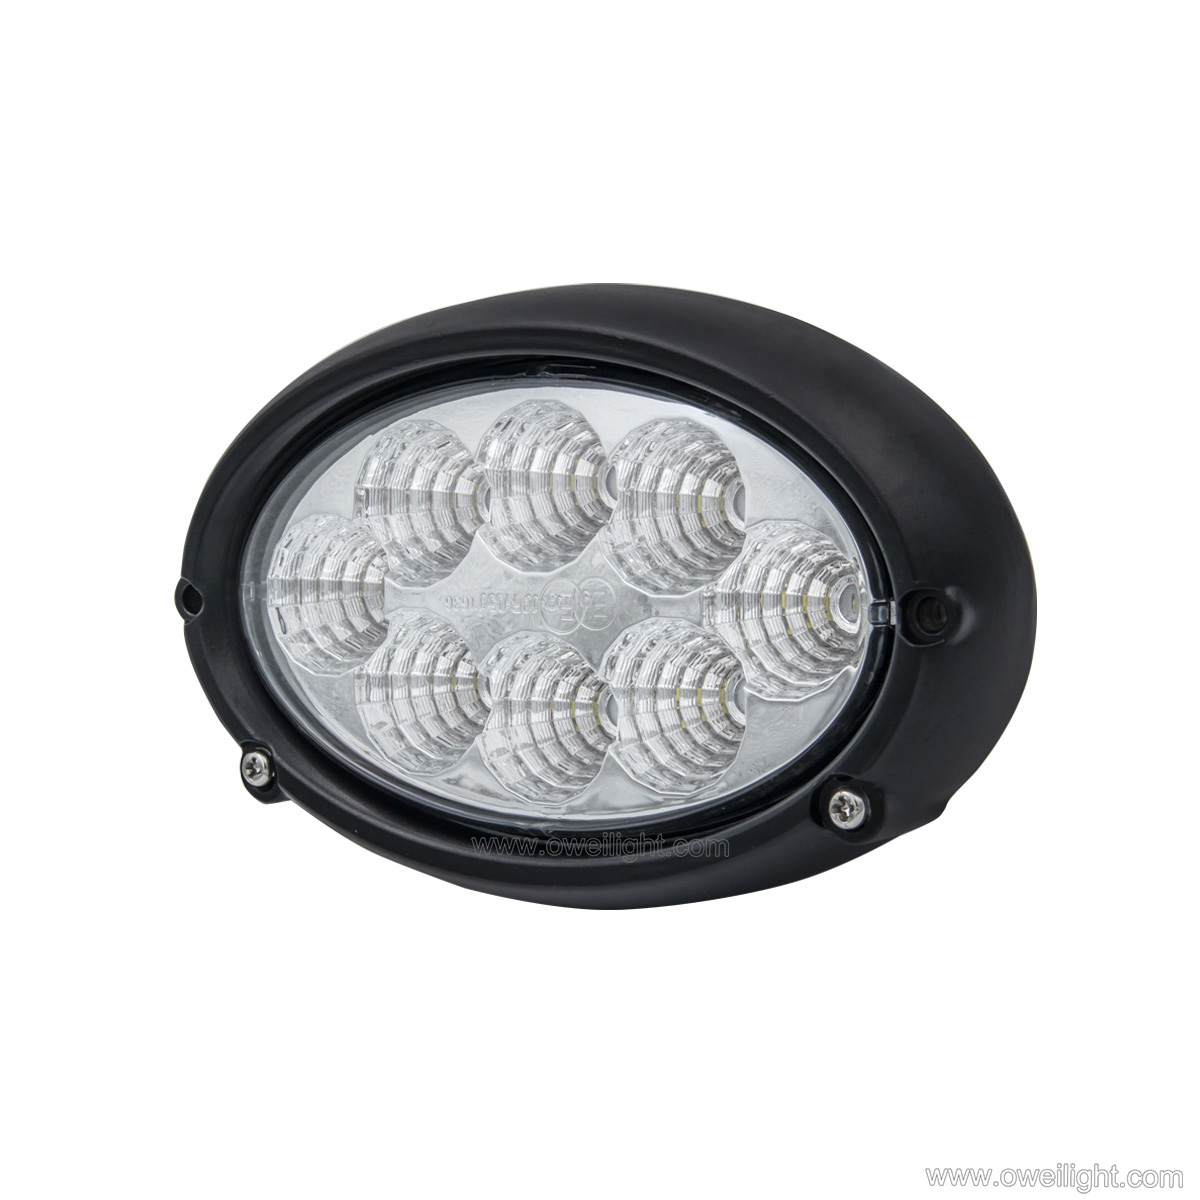 Agricultural Light - OW-4401 40W